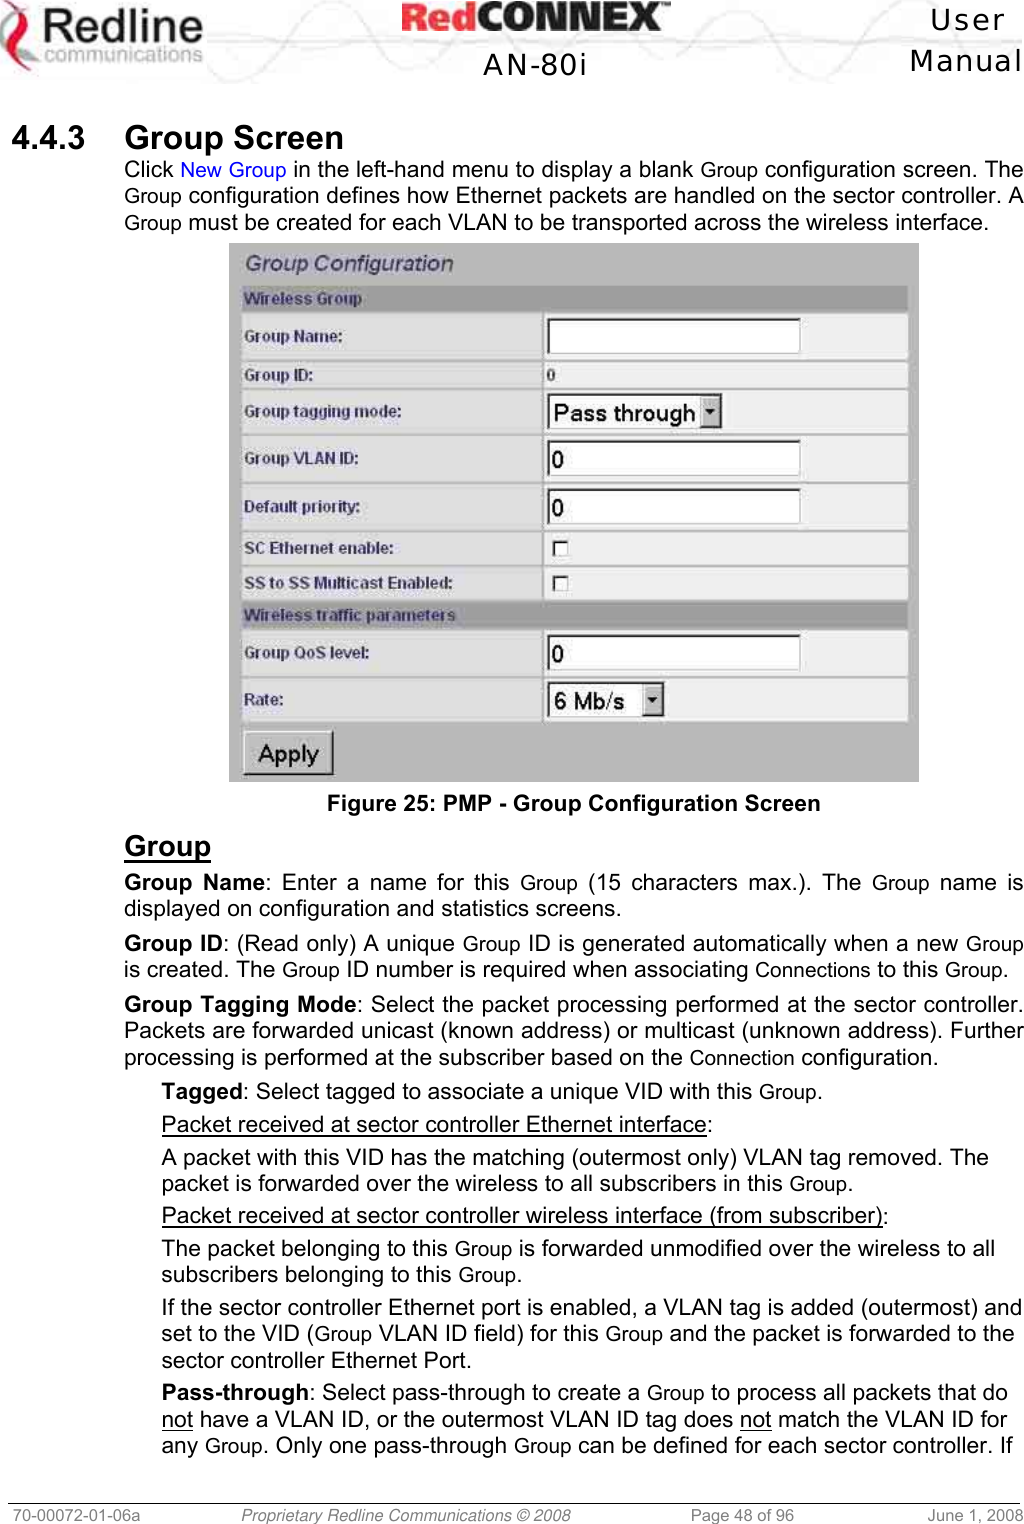   User  AN-80i Manual  70-00072-01-06a  Proprietary Redline Communications © 2008  Page 48 of 96  June 1, 2008  4.4.3 Group Screen Click New Group in the left-hand menu to display a blank Group configuration screen. The Group configuration defines how Ethernet packets are handled on the sector controller. A Group must be created for each VLAN to be transported across the wireless interface.  Figure 25: PMP - Group Configuration Screen  Group Group Name: Enter a name for this Group (15 characters max.). The Group name is displayed on configuration and statistics screens. Group ID: (Read only) A unique Group ID is generated automatically when a new Group is created. The Group ID number is required when associating Connections to this Group. Group Tagging Mode: Select the packet processing performed at the sector controller. Packets are forwarded unicast (known address) or multicast (unknown address). Further processing is performed at the subscriber based on the Connection configuration. Tagged: Select tagged to associate a unique VID with this Group. Packet received at sector controller Ethernet interface: A packet with this VID has the matching (outermost only) VLAN tag removed. The packet is forwarded over the wireless to all subscribers in this Group. Packet received at sector controller wireless interface (from subscriber): The packet belonging to this Group is forwarded unmodified over the wireless to all subscribers belonging to this Group.  If the sector controller Ethernet port is enabled, a VLAN tag is added (outermost) and set to the VID (Group VLAN ID field) for this Group and the packet is forwarded to the sector controller Ethernet Port. Pass-through: Select pass-through to create a Group to process all packets that do not have a VLAN ID, or the outermost VLAN ID tag does not match the VLAN ID for any Group. Only one pass-through Group can be defined for each sector controller. If 